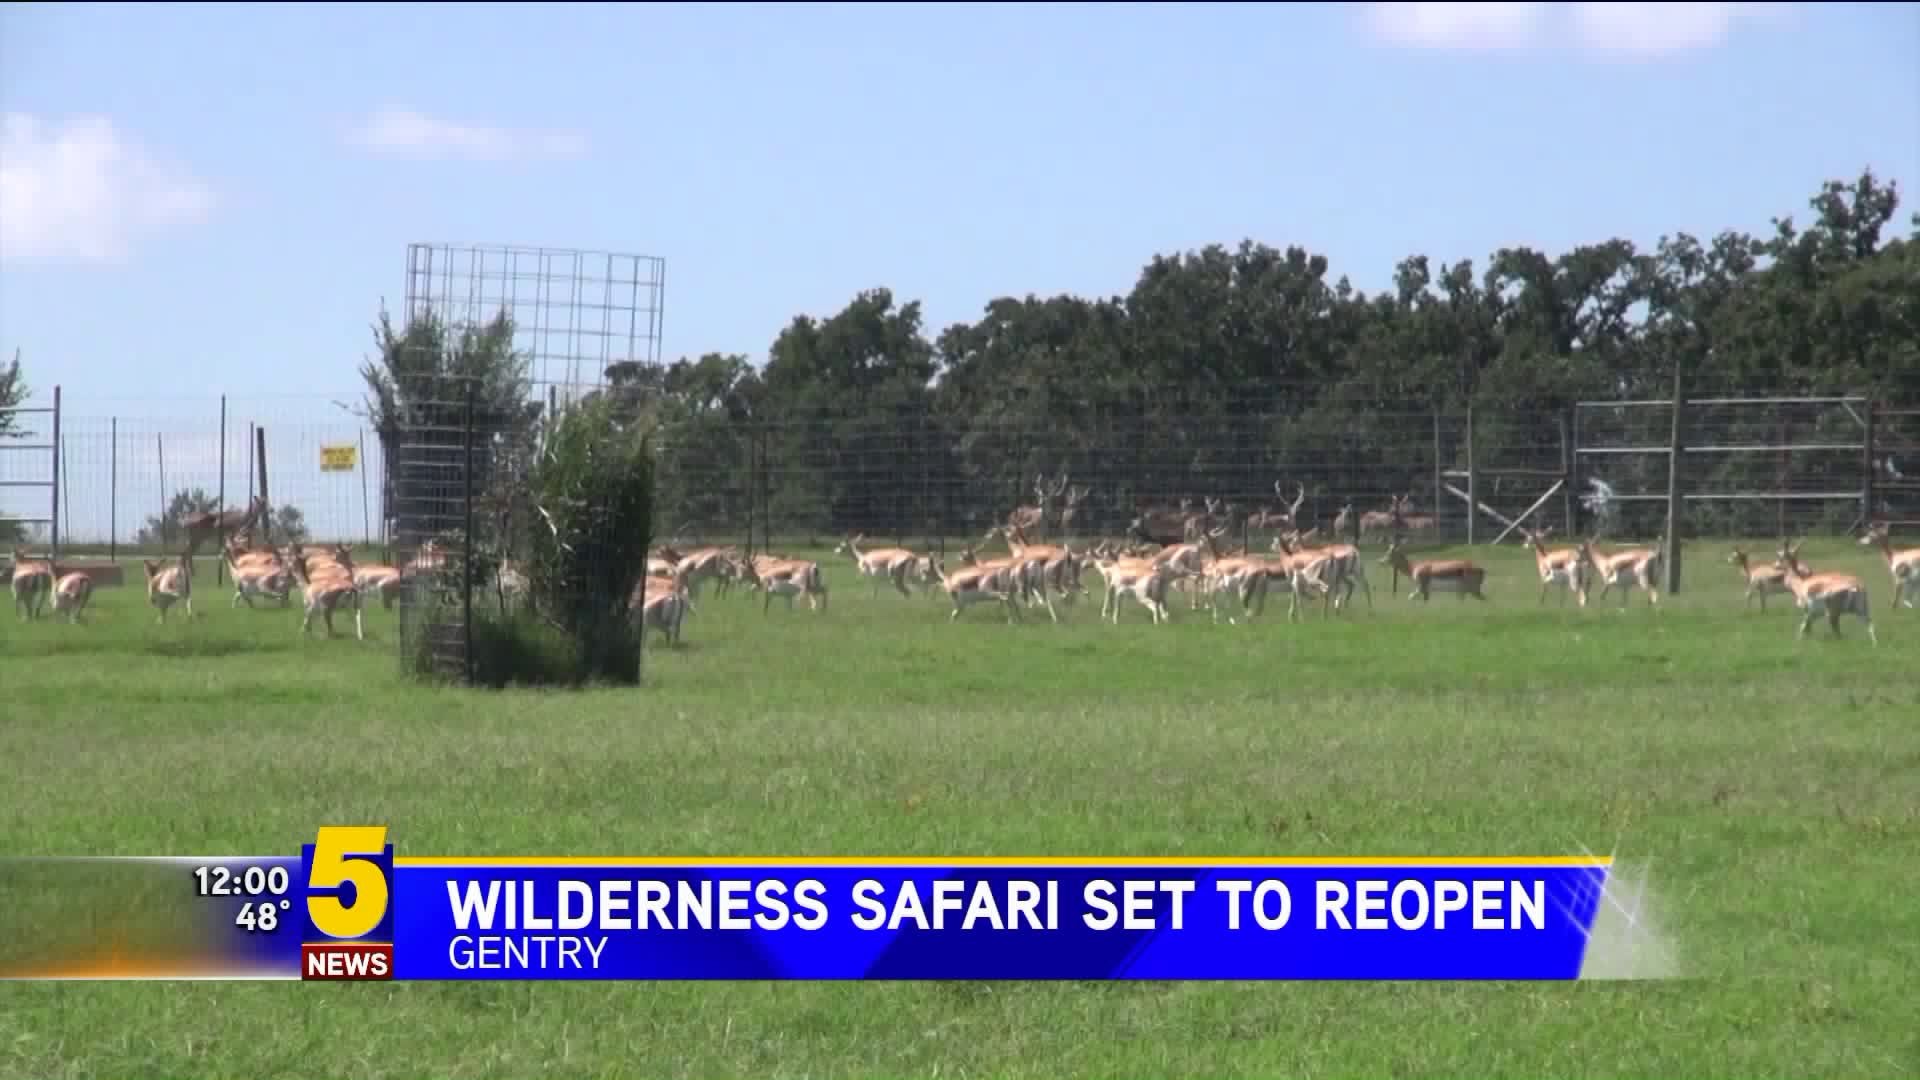 Gentry Wilderness Safari Set To Reopen After Paying $75k To Settle USDA Complaint